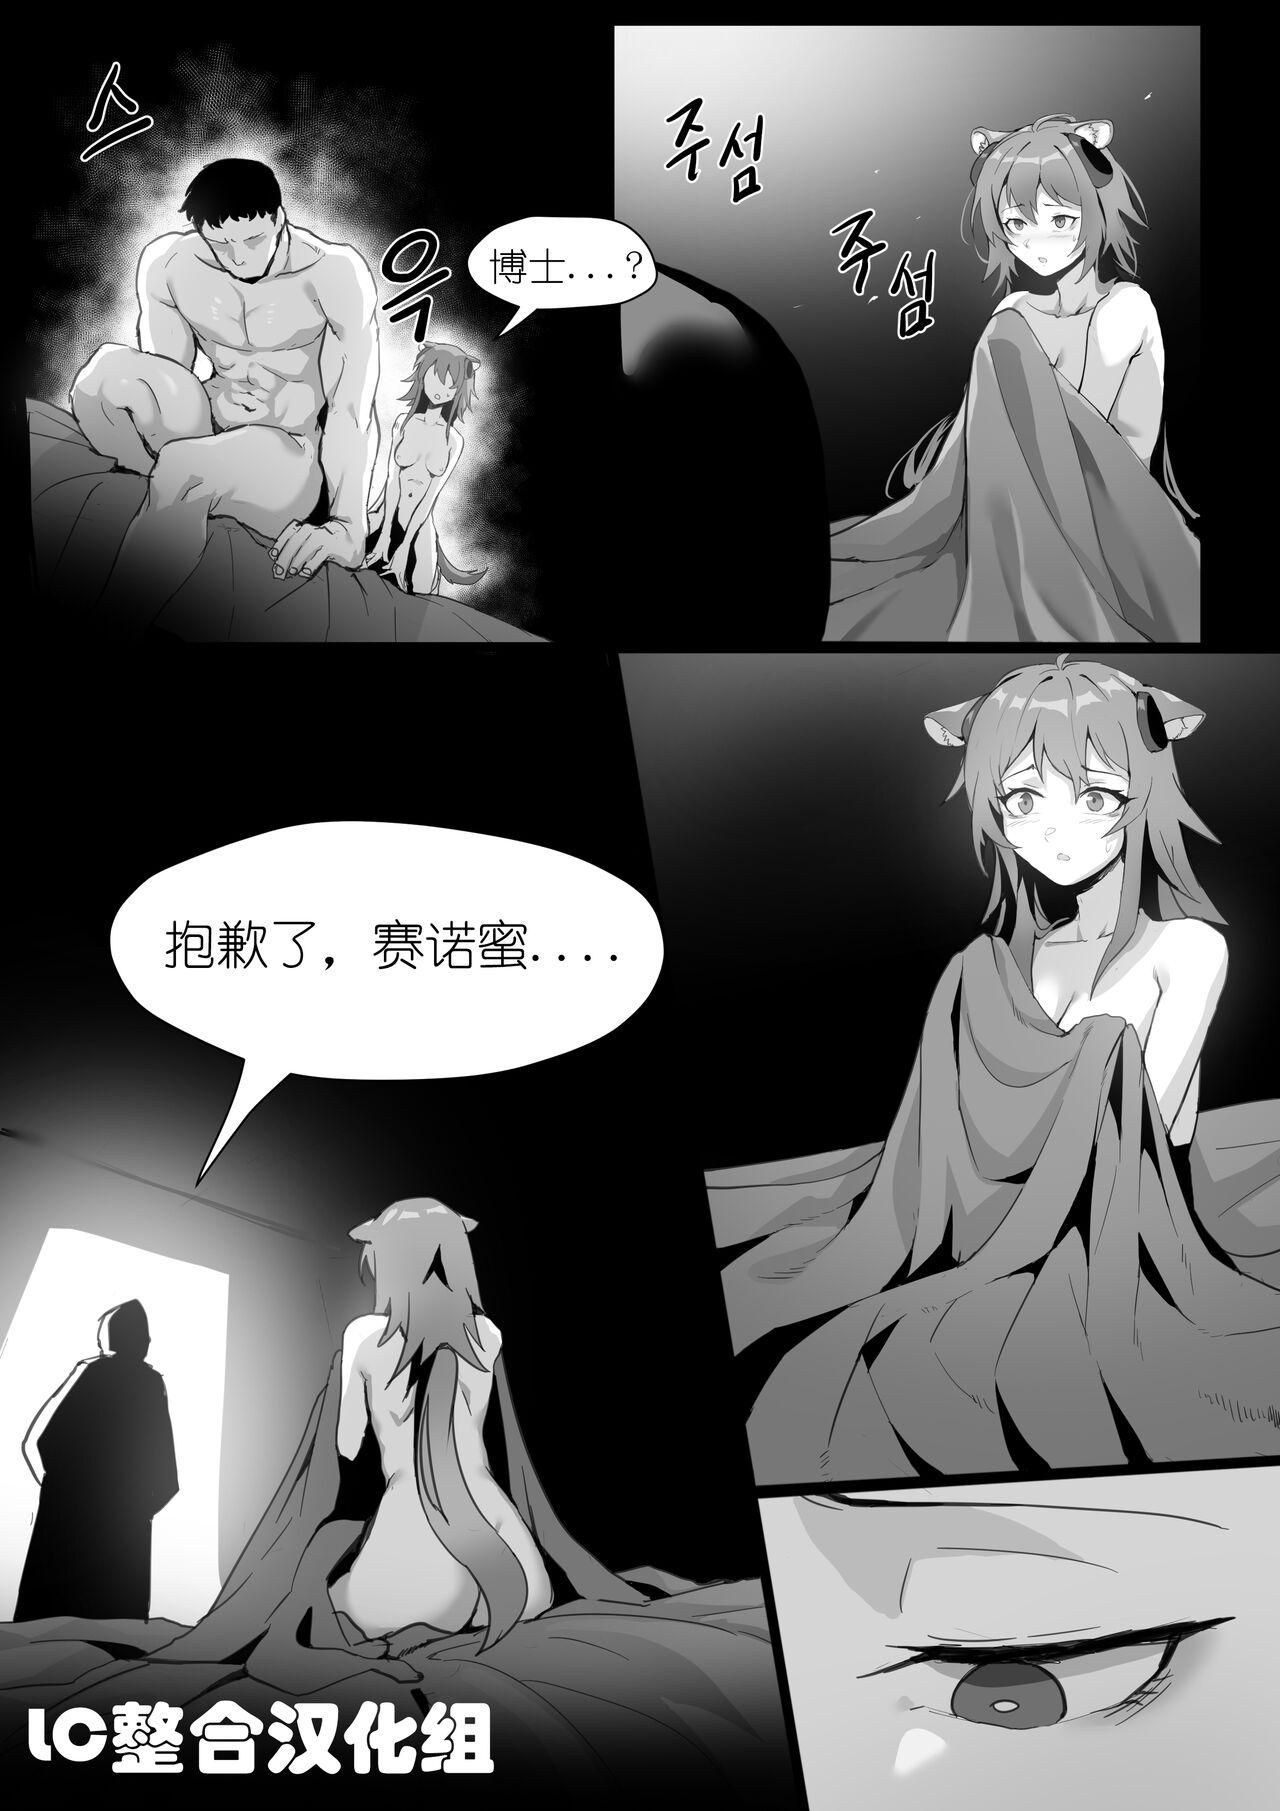 Blowing 欲望方舟记录3 - Arknights Blows - Page 5